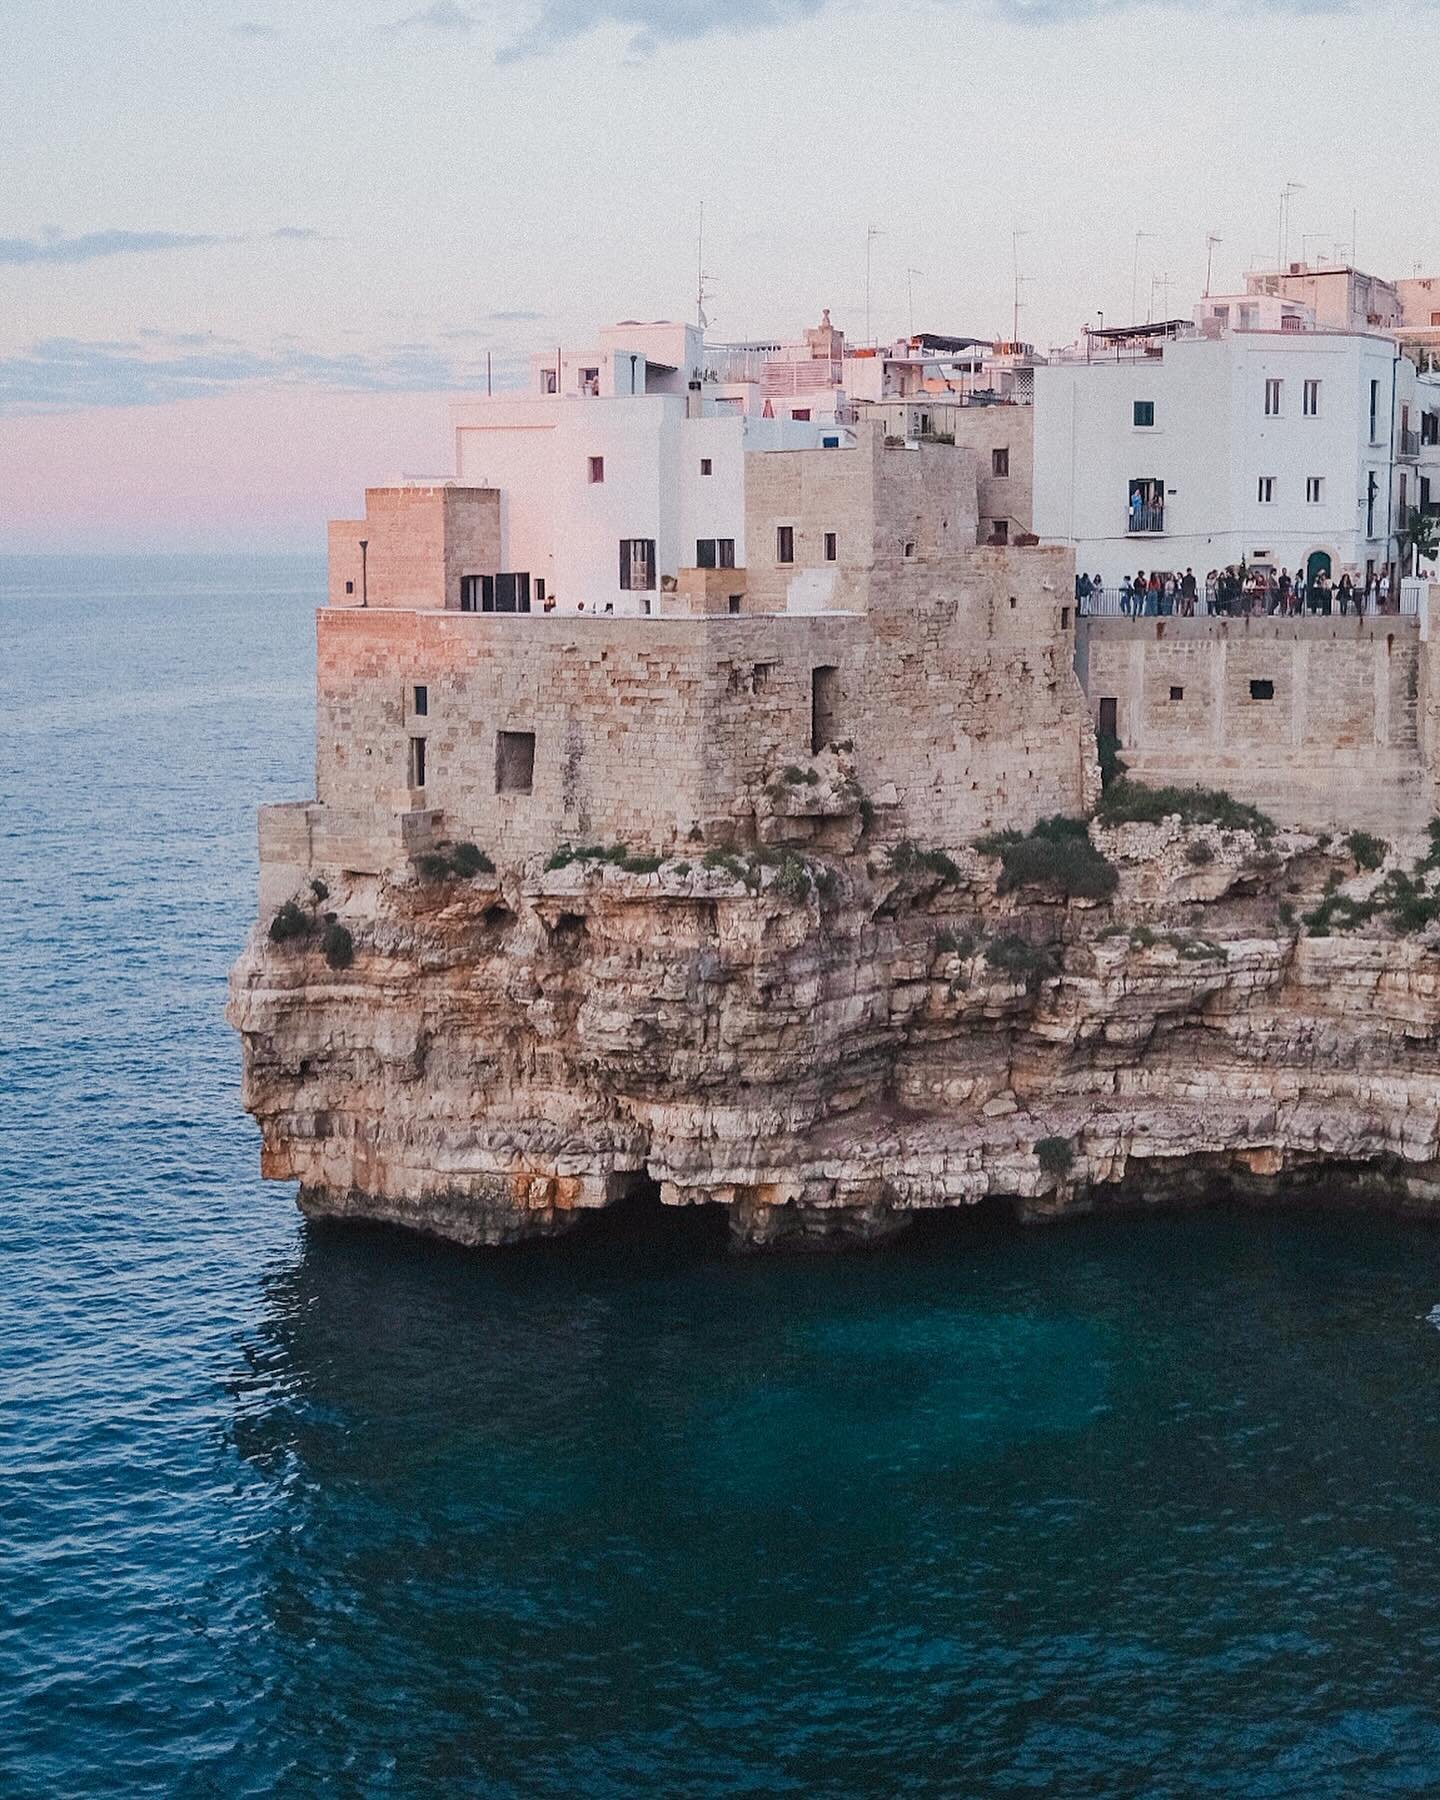 The seaside in Polignano a Mare is spectacular any time of day, but I&rsquo;d argue it is especially beautiful at sunset 🥹